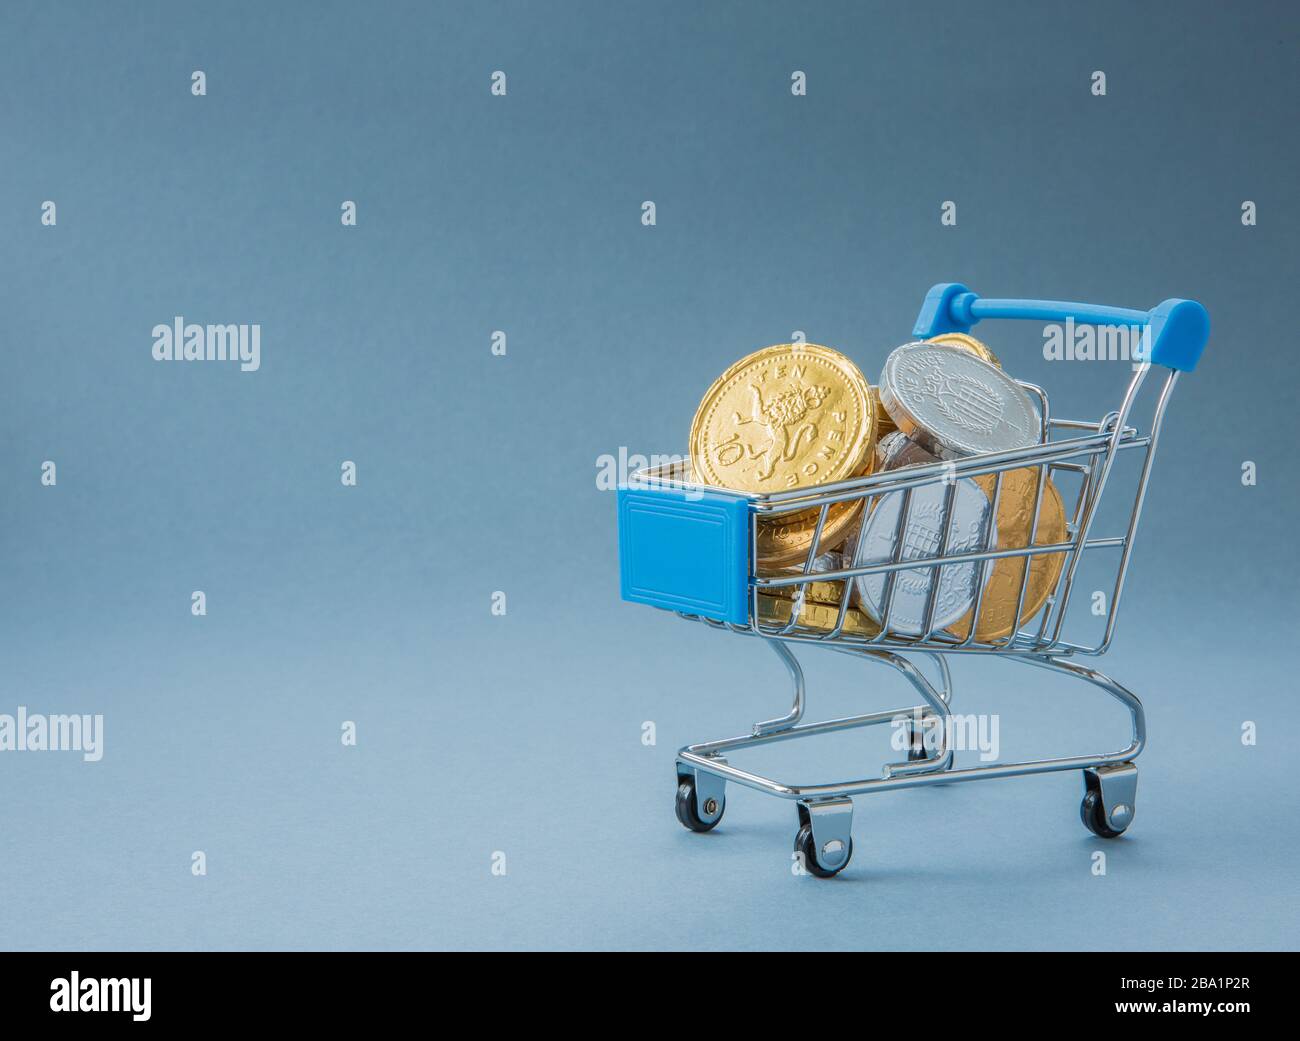 A concept of a Supermarket shopping trolley or cart full of cash, coins and money representing consumer spending at retail outlets with copy space Stock Photo